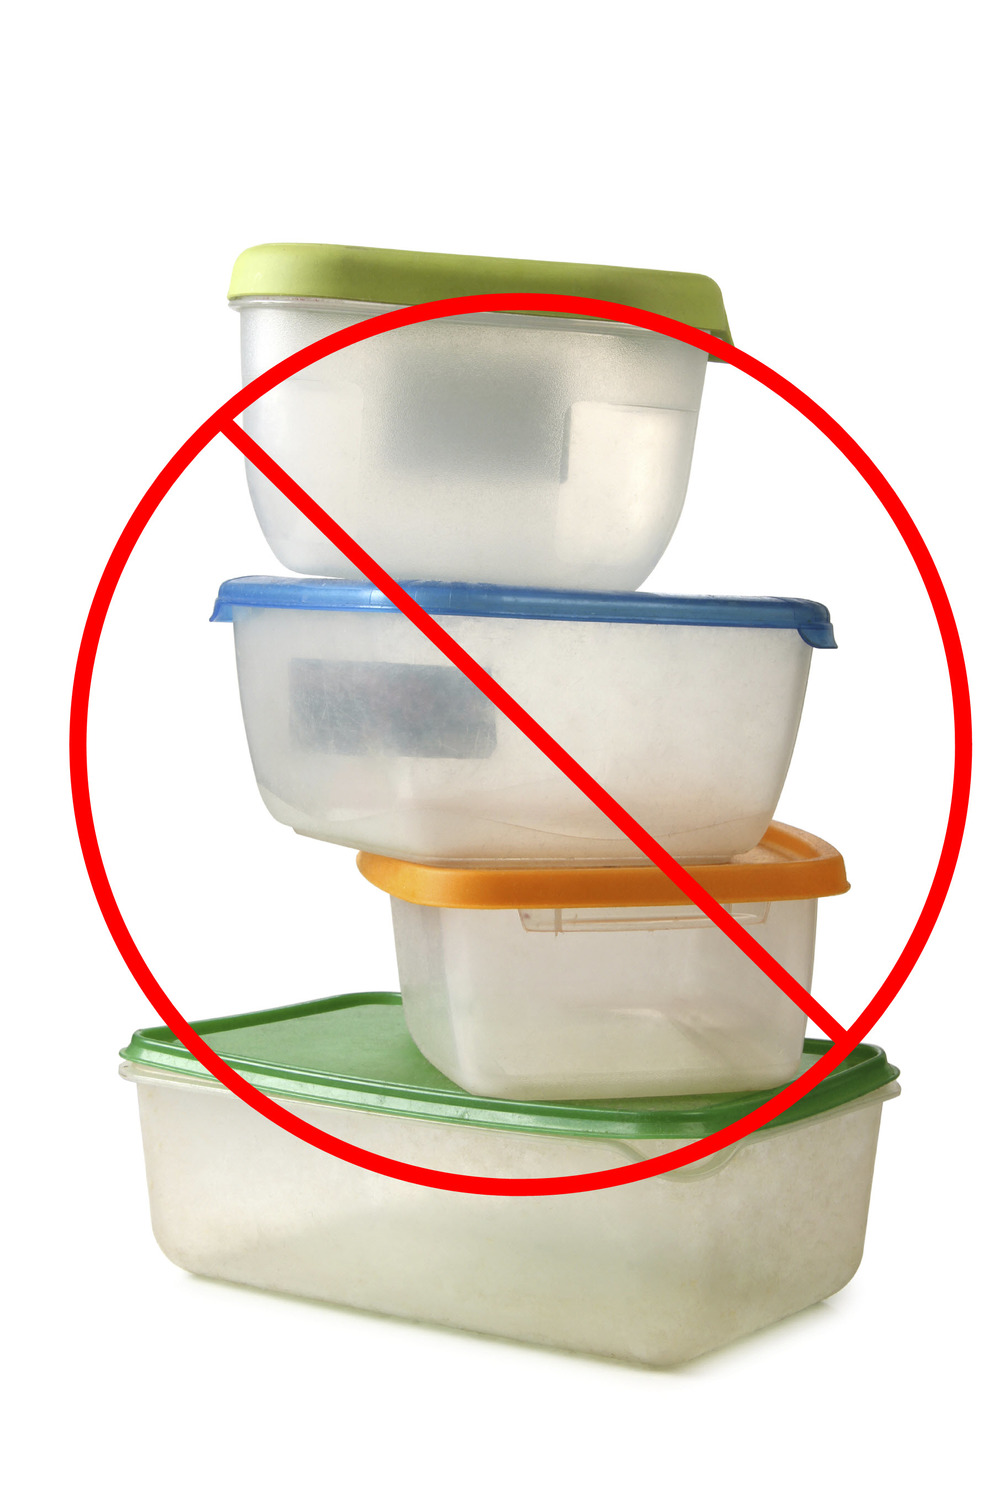 Say-No-To-Plastic-tupperware-meal-prep-containers